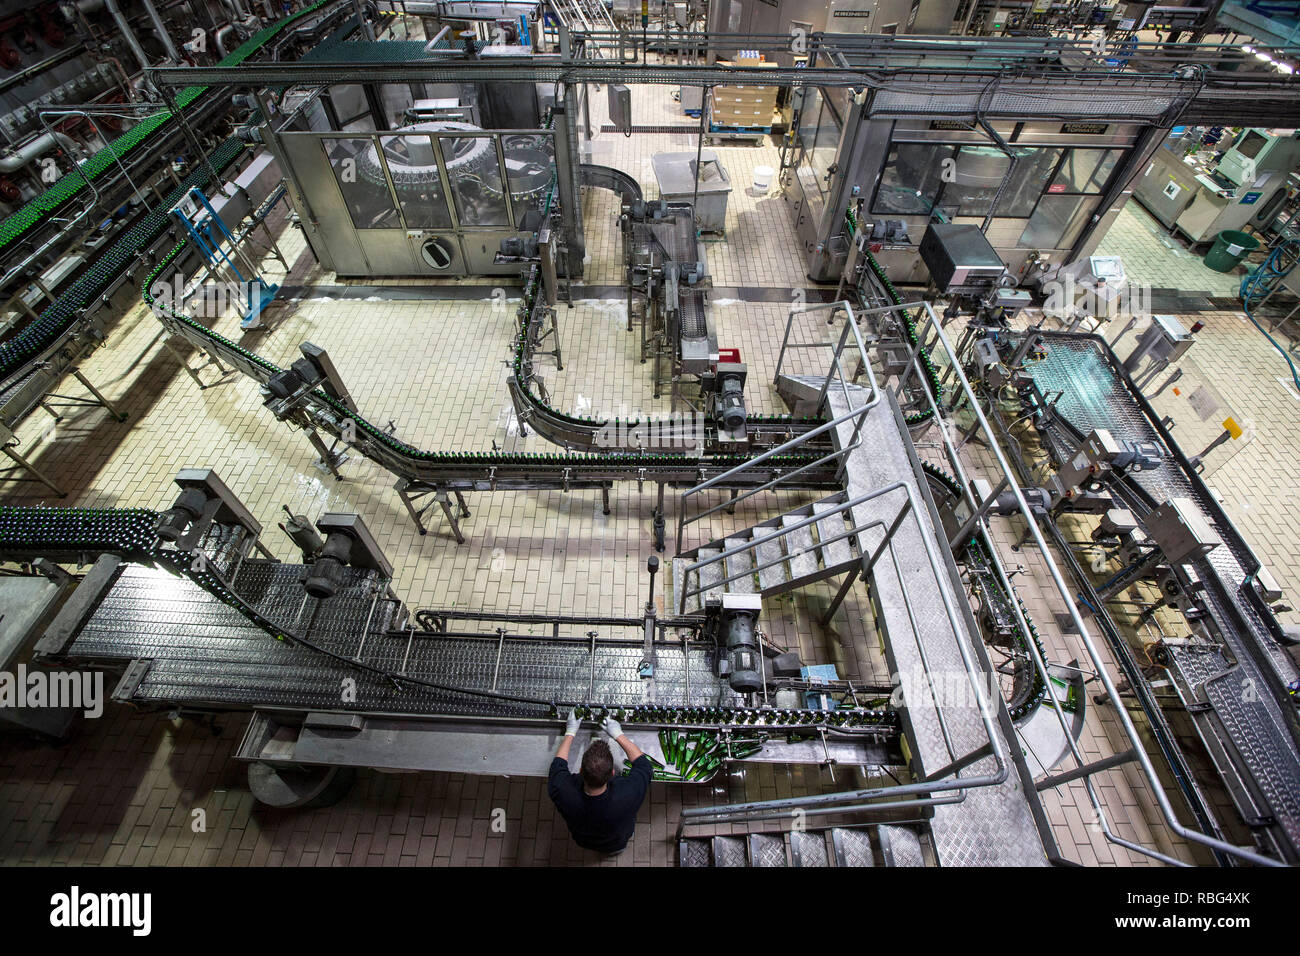 Obernai (north-eastern France): Kronenbourg Brasserie,Obernai (north-eastern France). 2015/05/27. Bottling lines with glass bottles within the 'K2' si Stock Photo